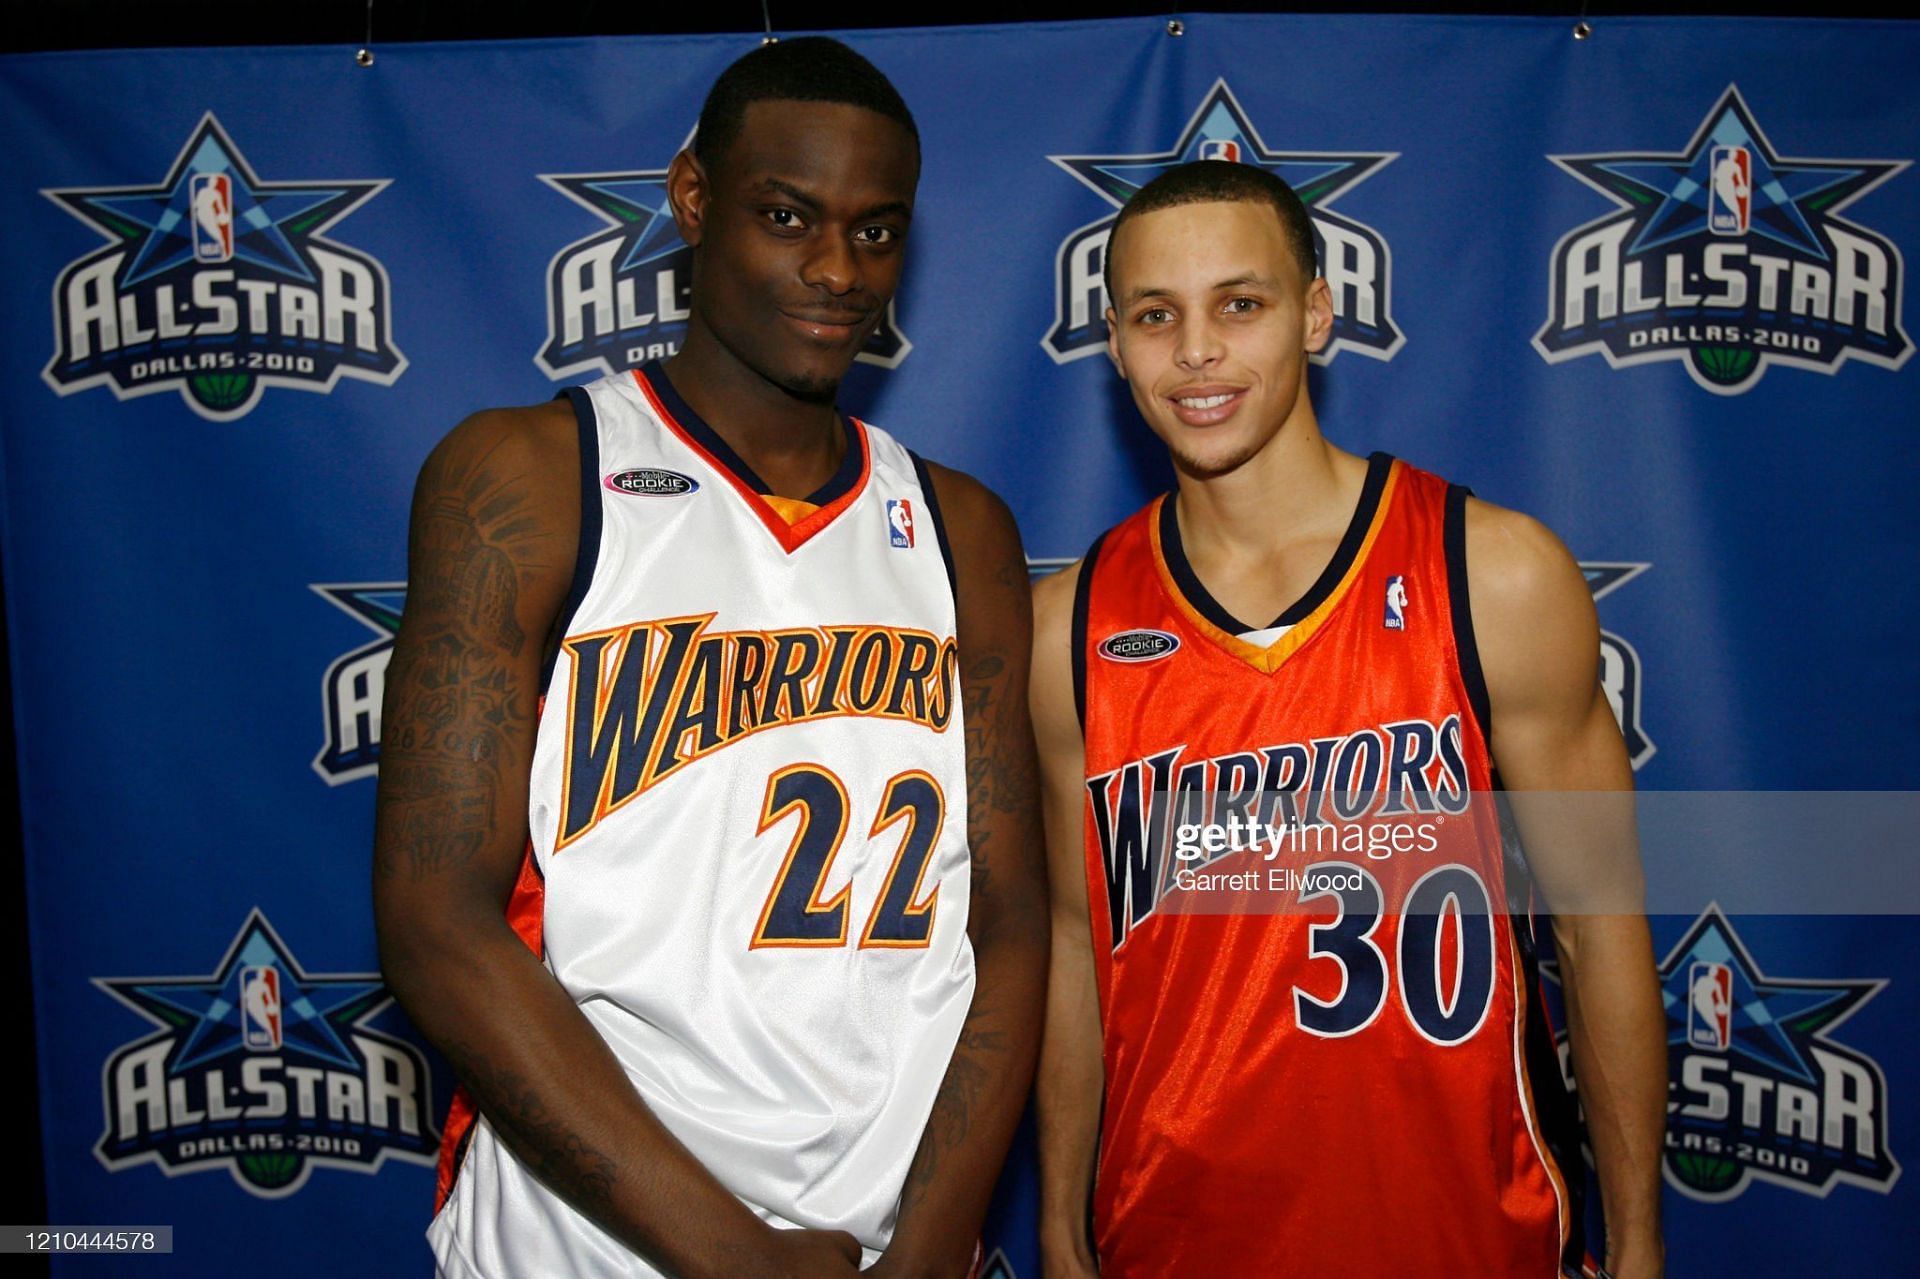 Steph Curry and Anthony Morrow (left) with the Golden State Warriors in 2010